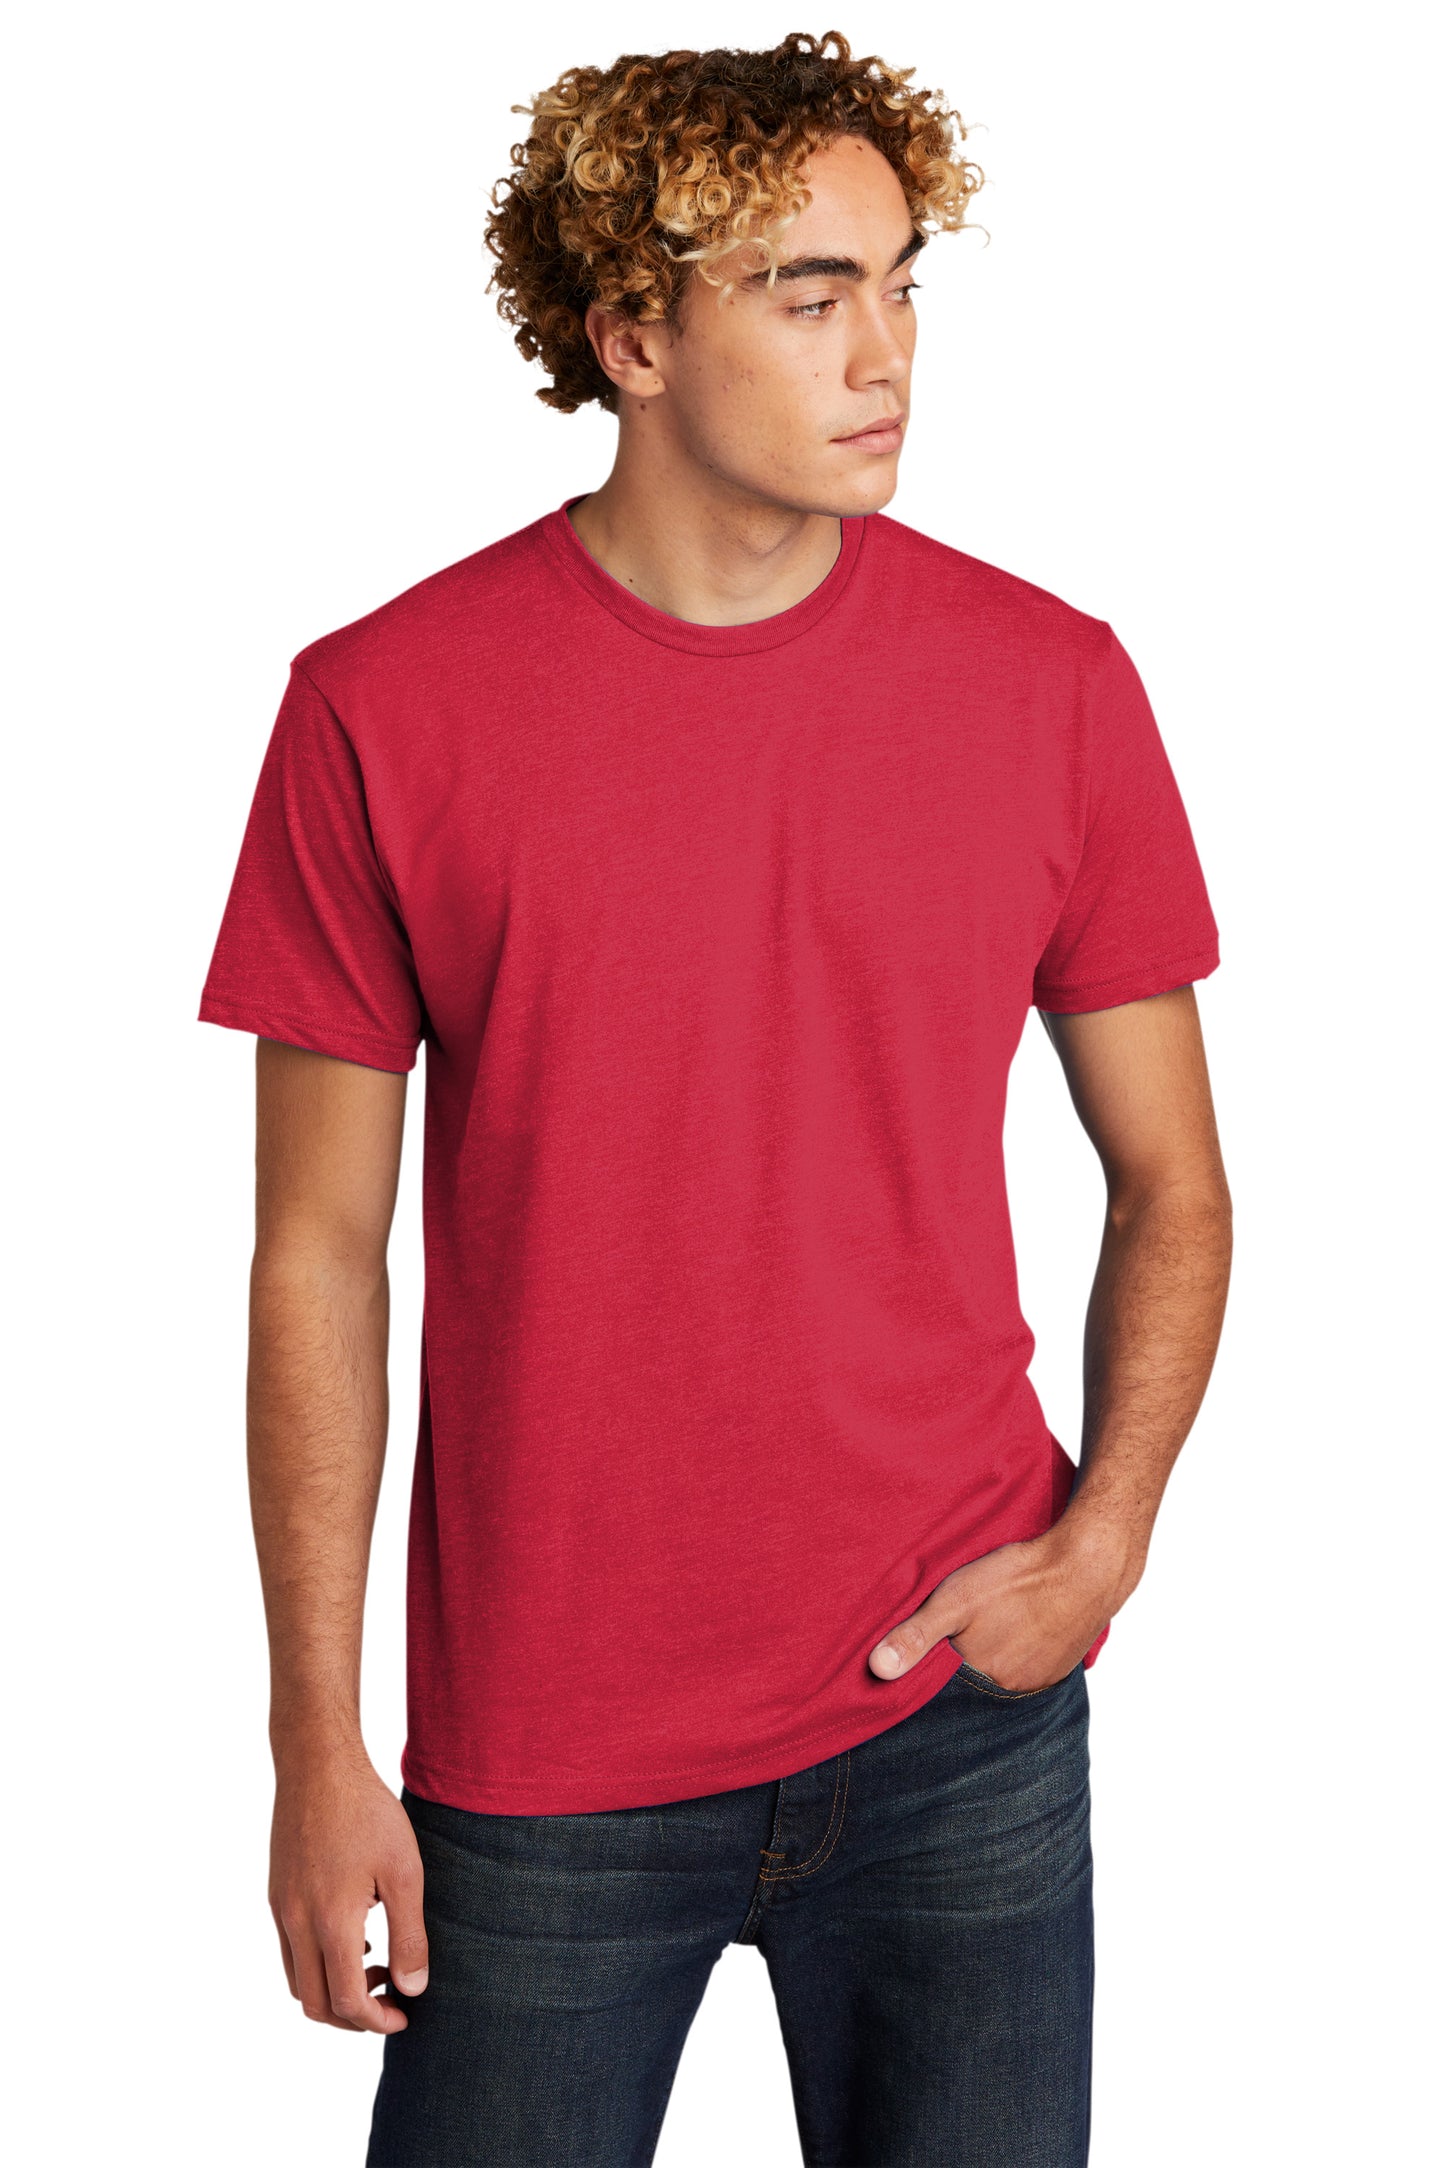 Next Level Red Tee